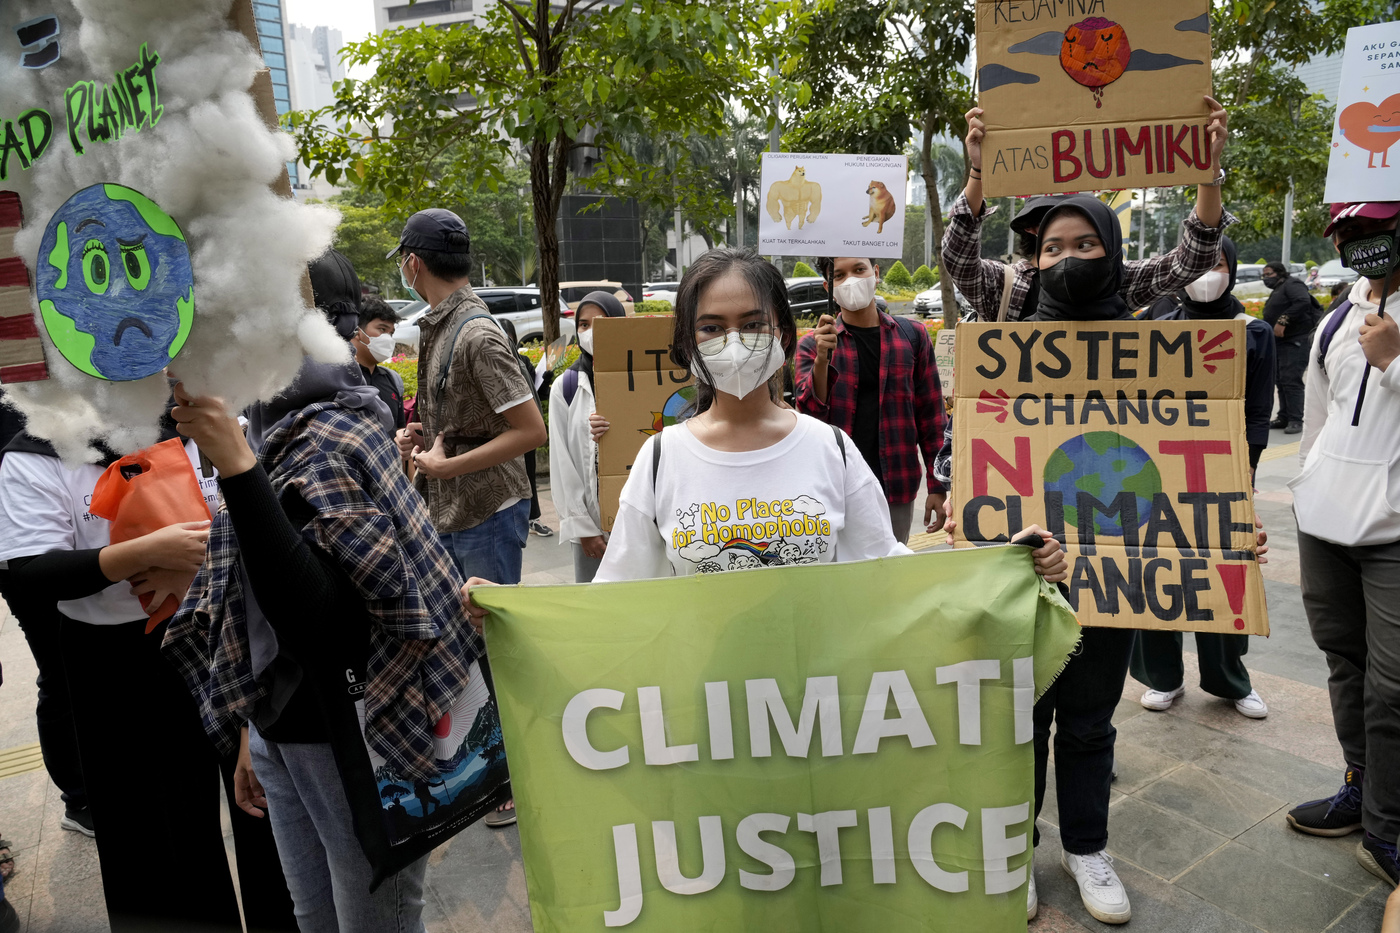 Environmental activists hold up posters during a protest calling for the government to take immediate action against climate change in Jakarta, Indonesia, Friday, March 25, 2022. (AP Photo/Tatan Syuflana)